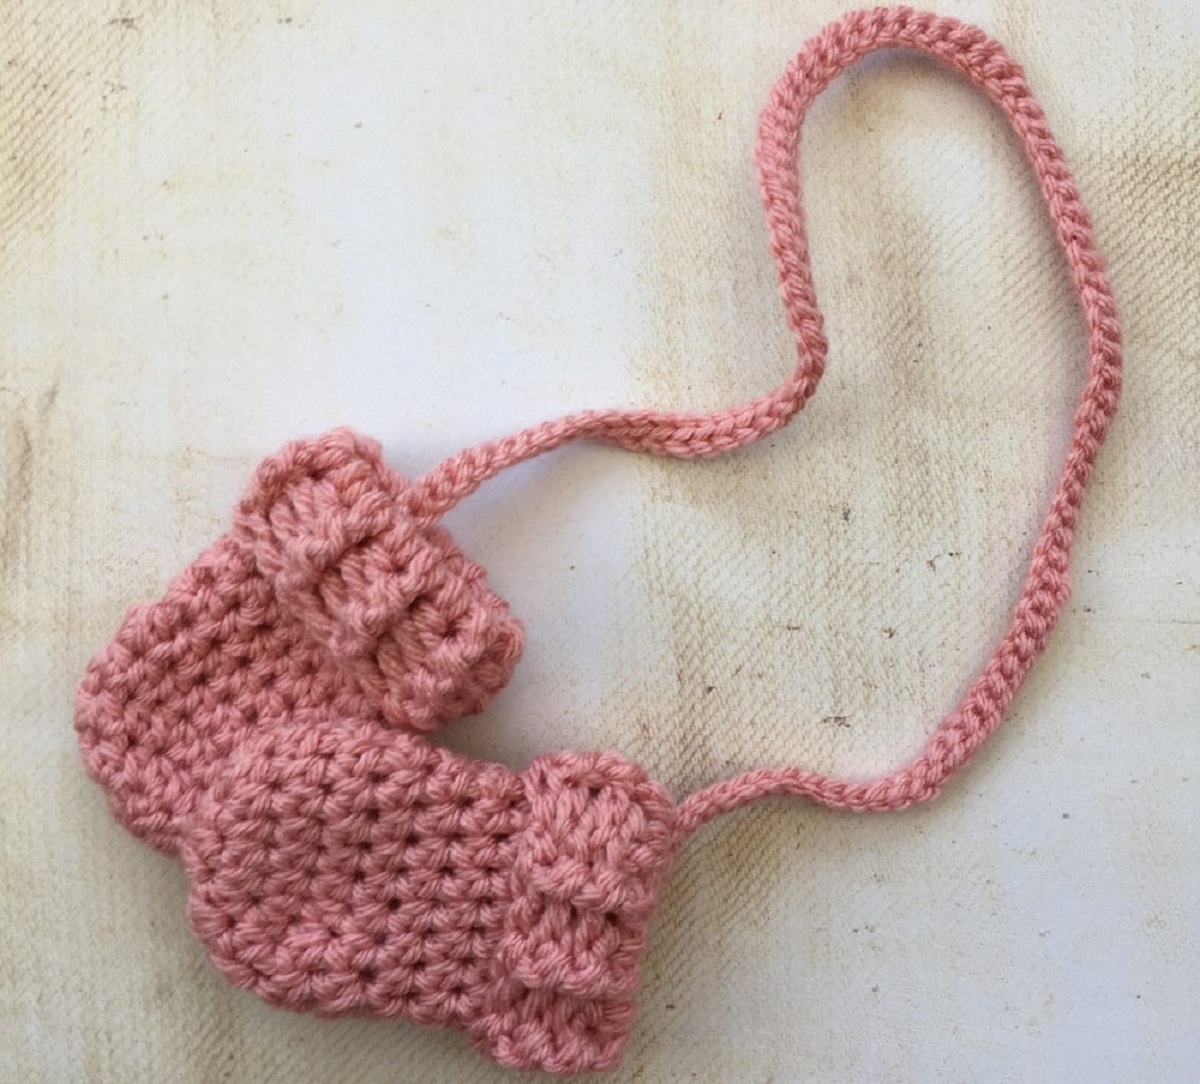 Chunky crochet pink baby mittens attached to a braided string on a white background.